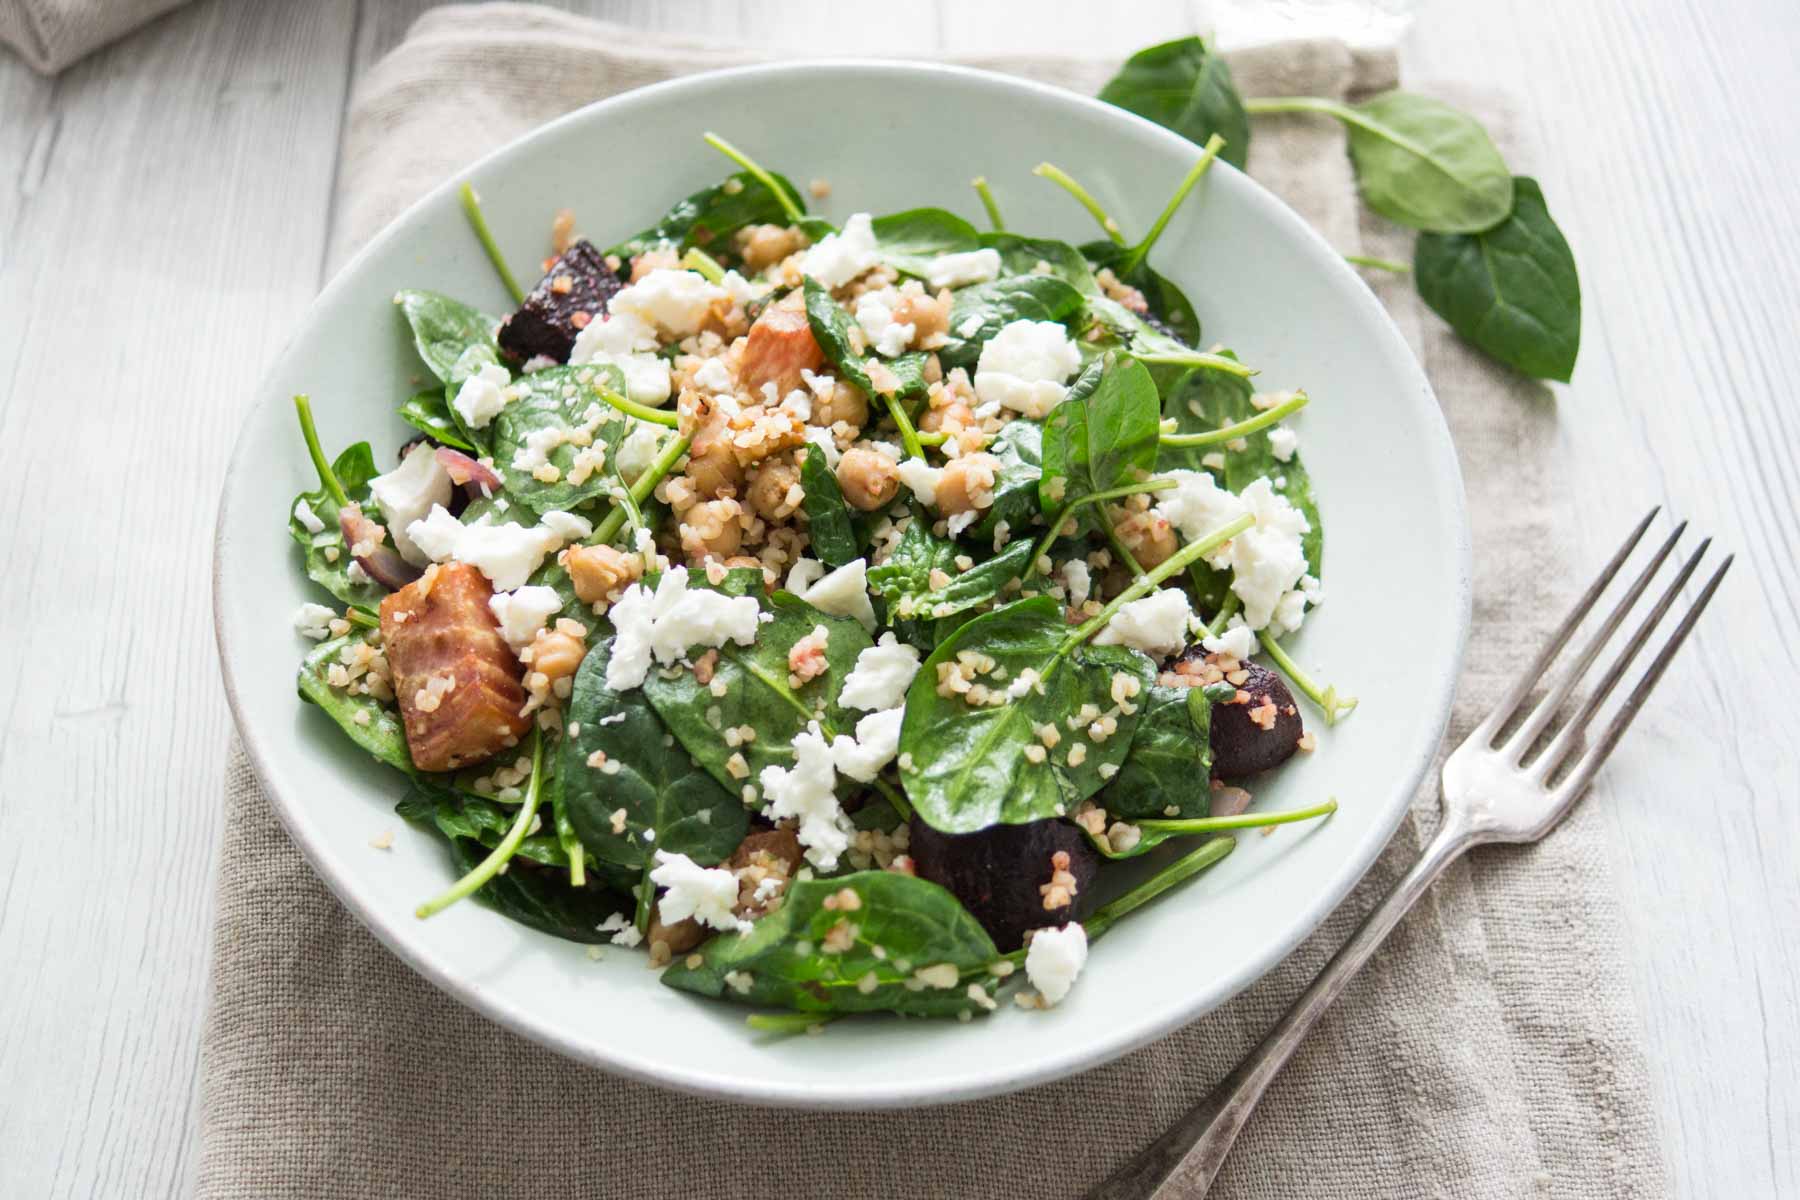 Spinach Salad with Beets, Chickpeas, Bulgur and Feta